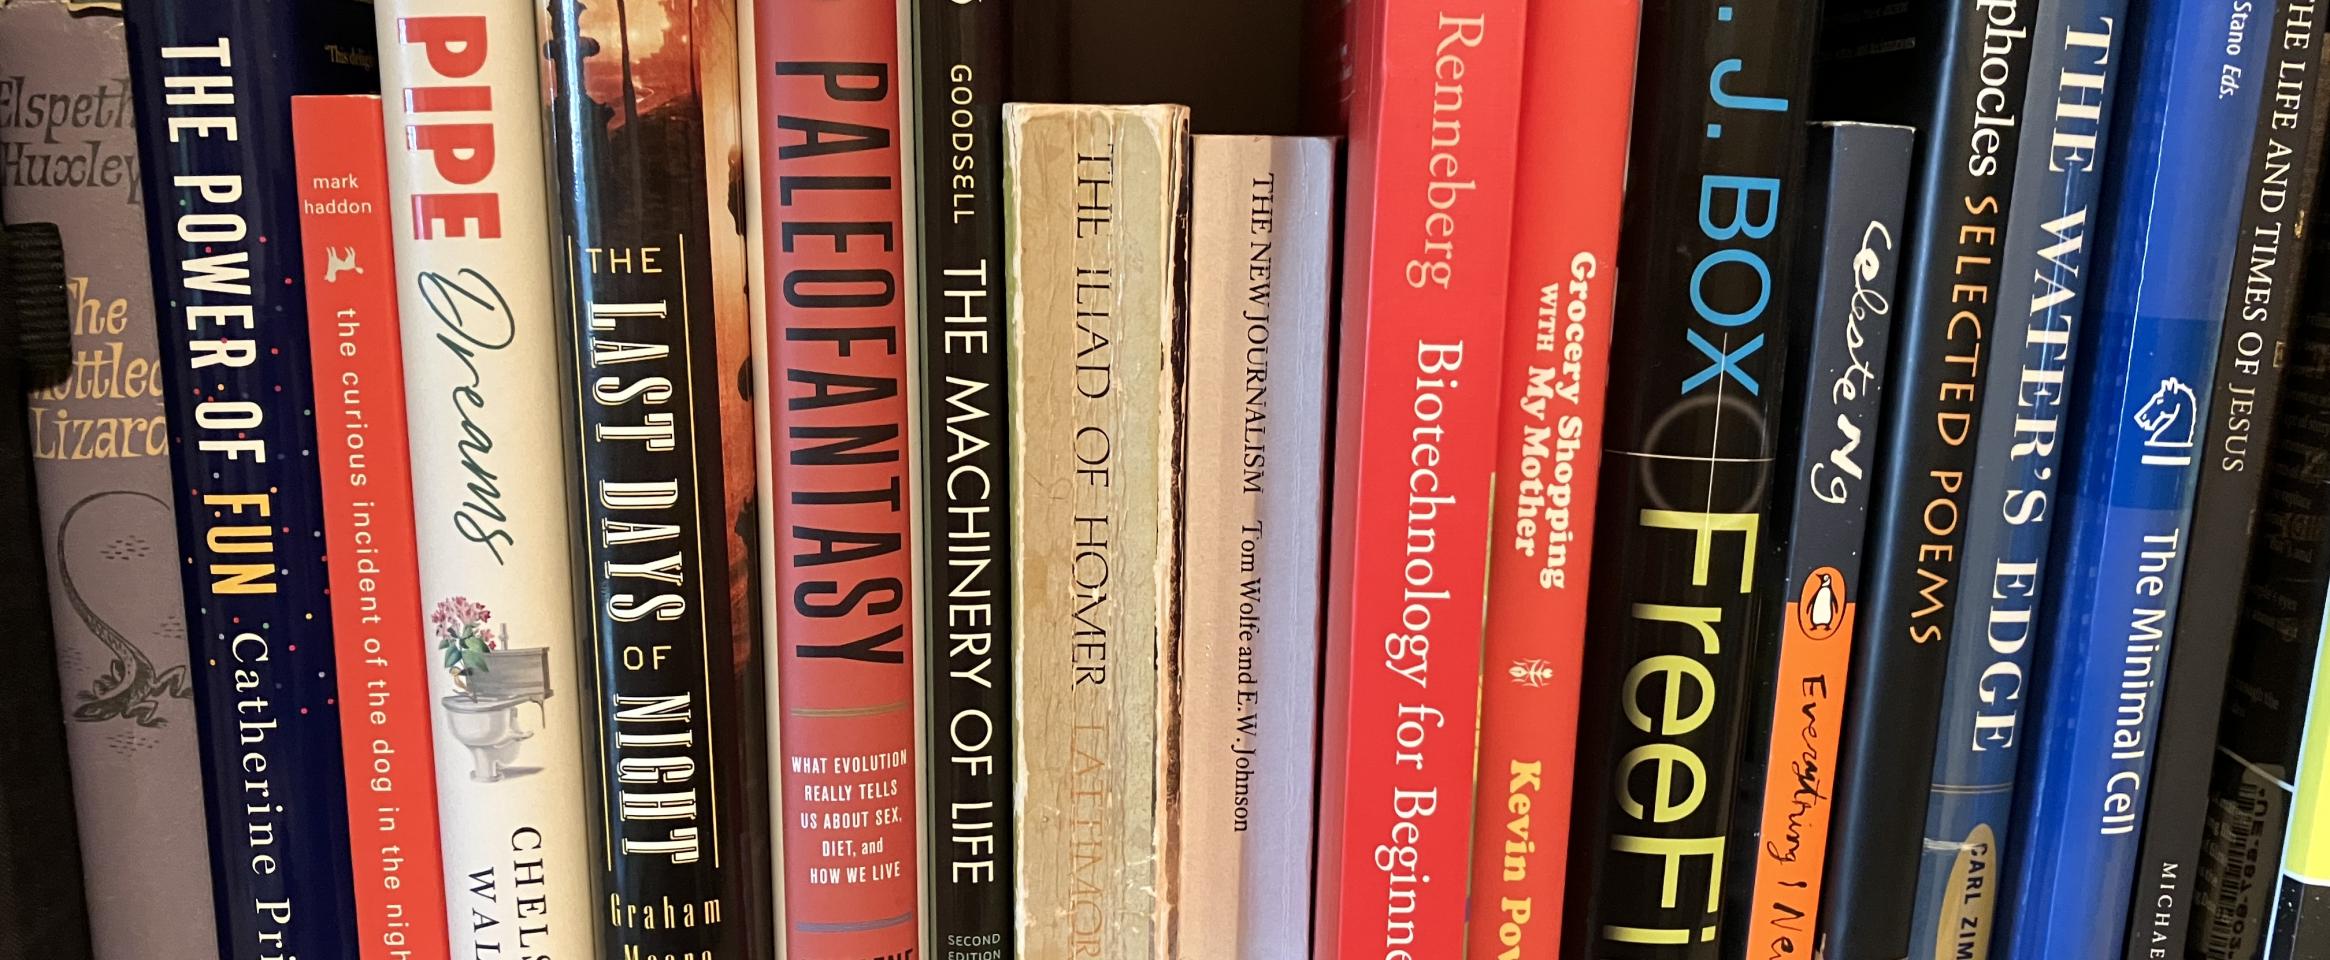 Rectangular photo of Ted Anton’s office bookshelf with titles on biotechnology and literature, reflecting both his book’s topic and his work as a professor of English at DePaul University. Photo credit Ted Anton.